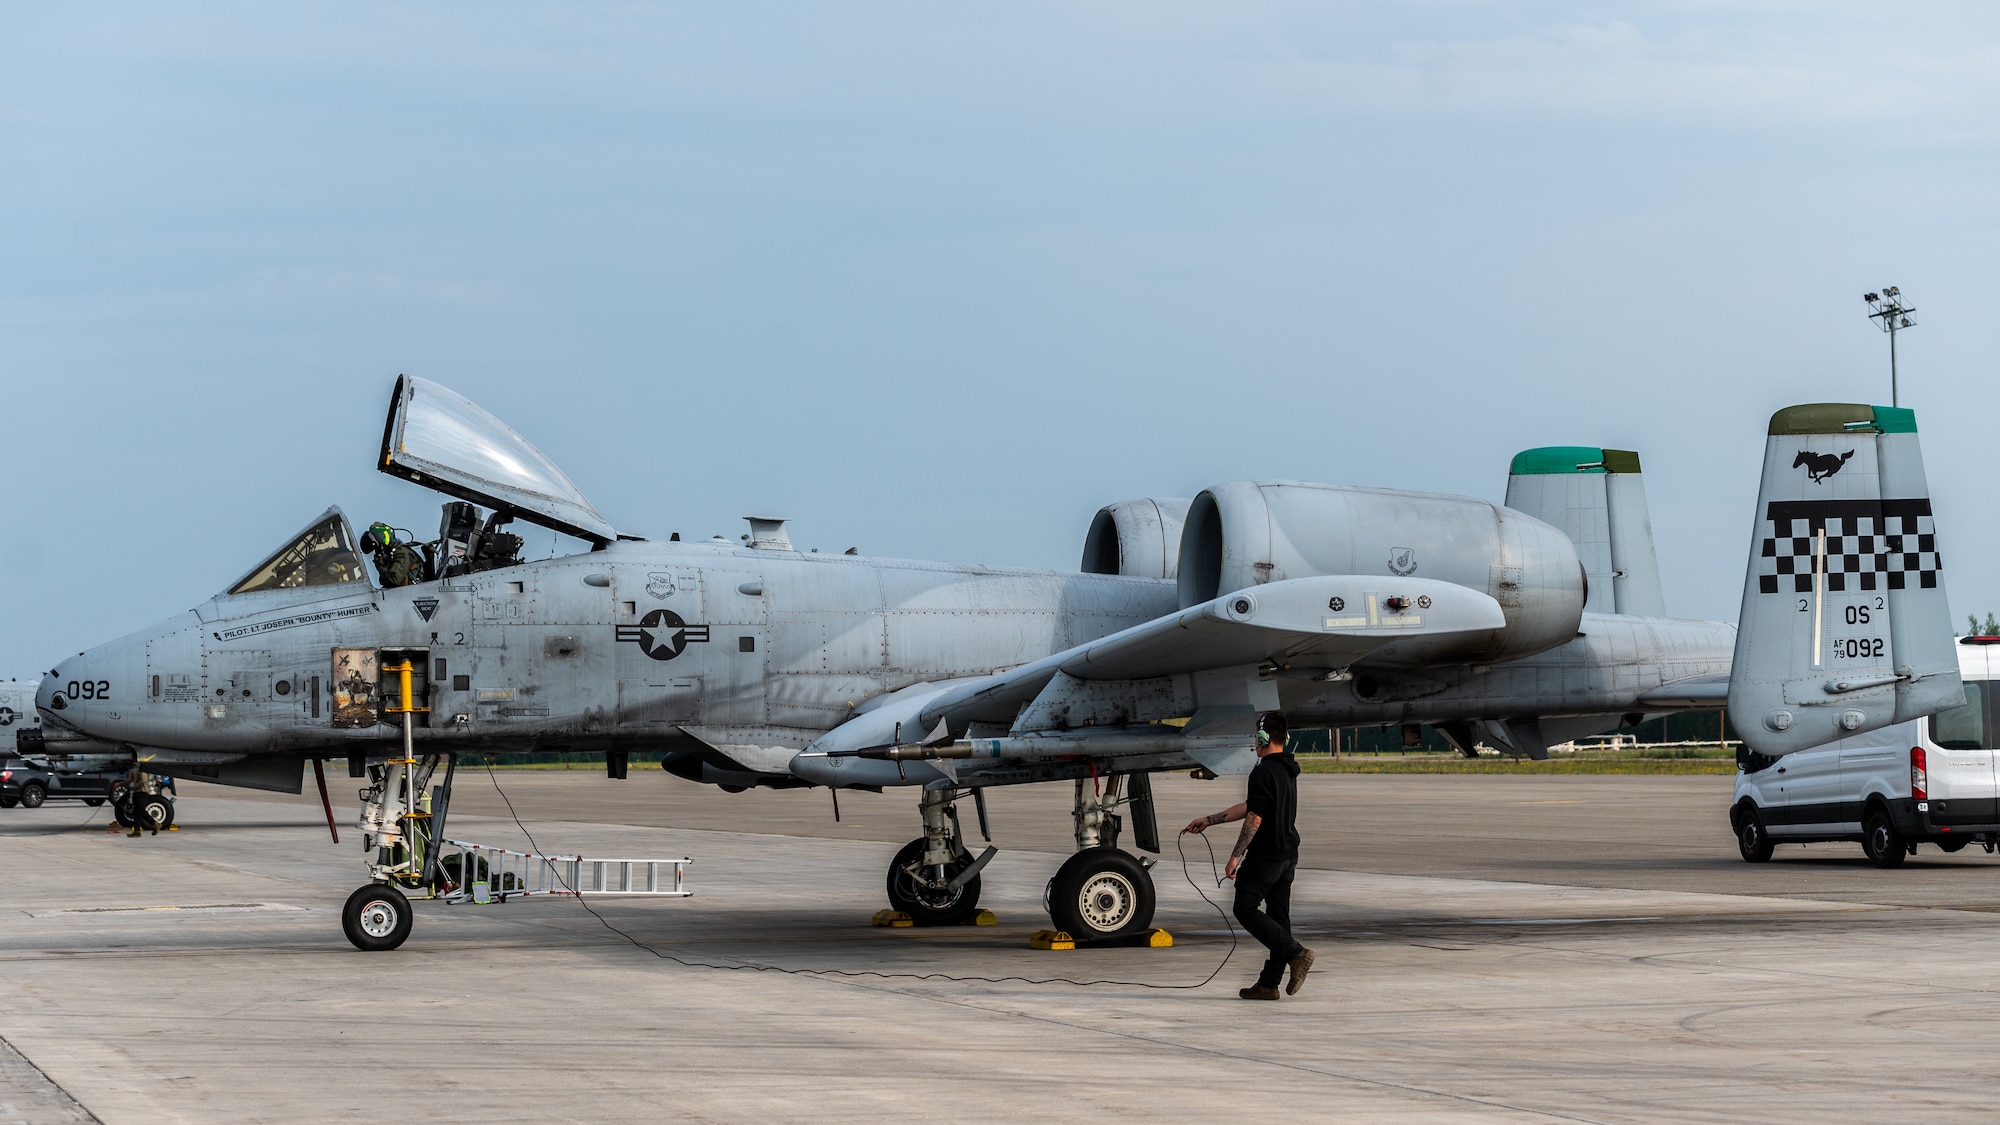 U.S. Air Force Capt. Colleen “Cloud” Engelbrecht, 25th Fighter Squadron pilot, and Staff Sgt. Jason Moore, 25th Fighter Generation Squadron crew chief, performs A-10 Thunderbolt II preflight procedures